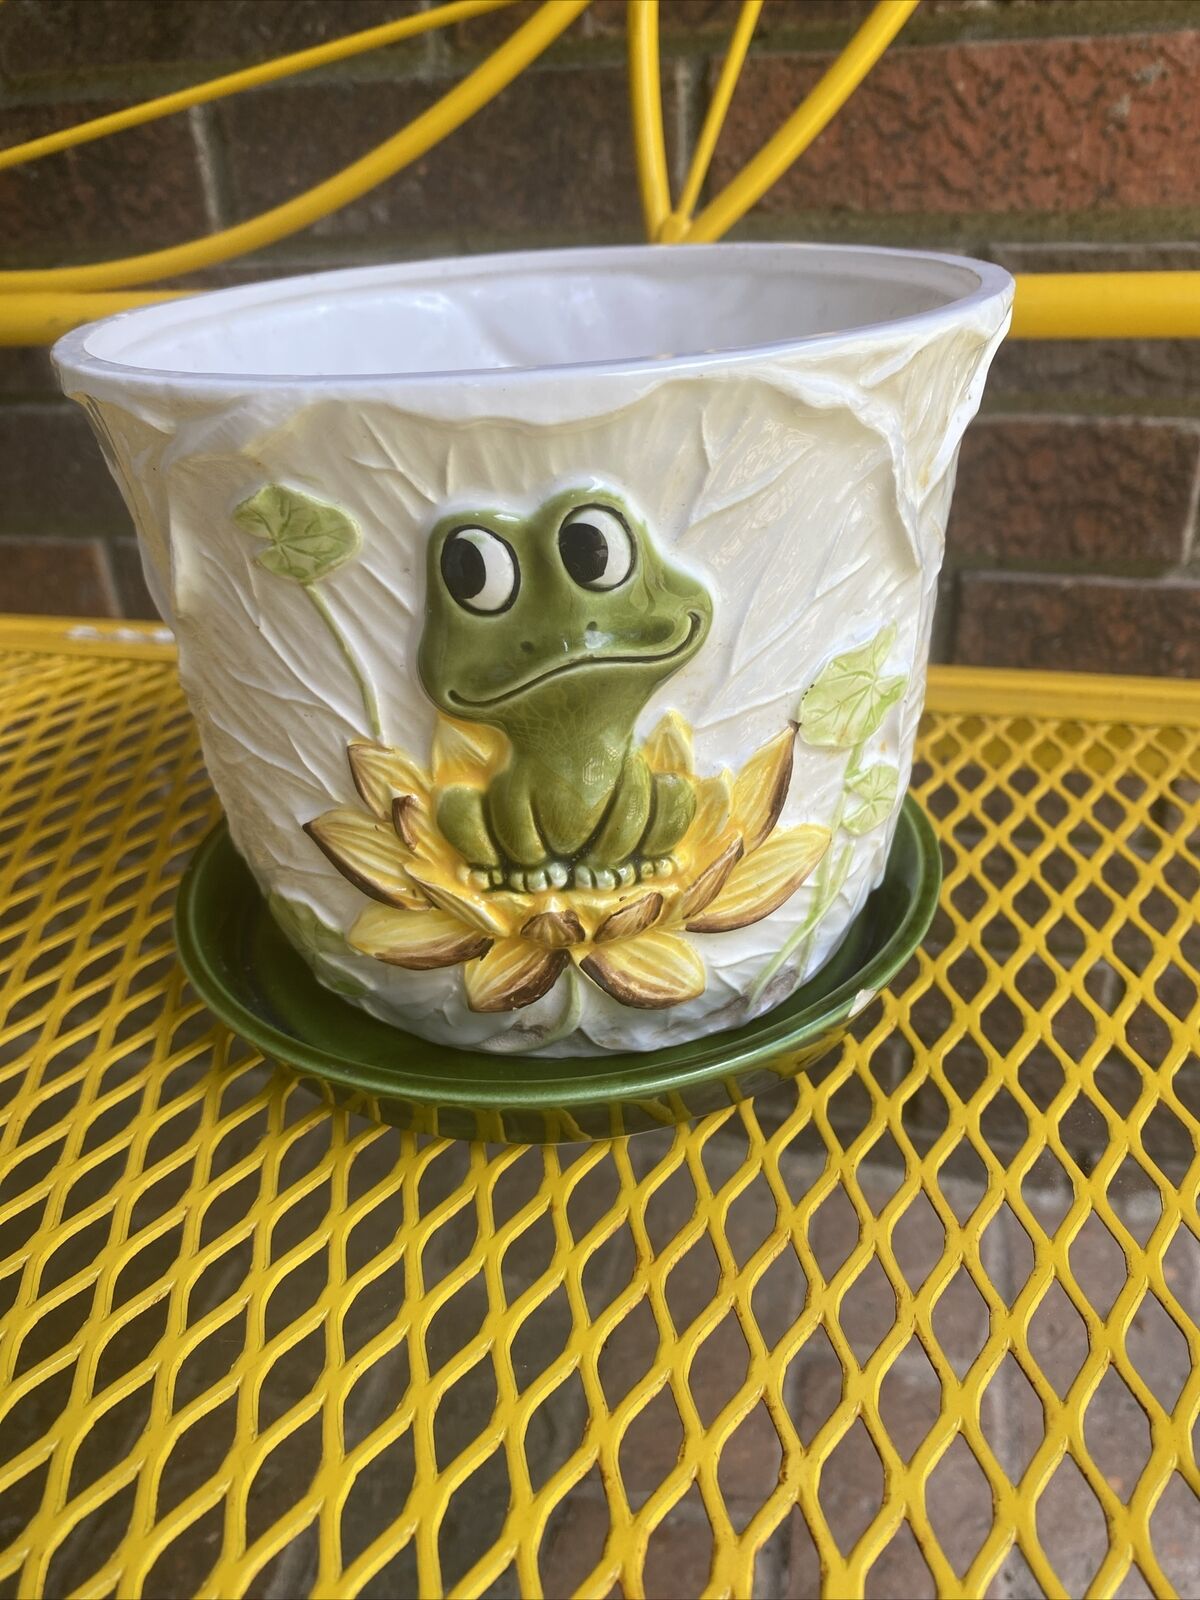 Sears Neil the frog planter